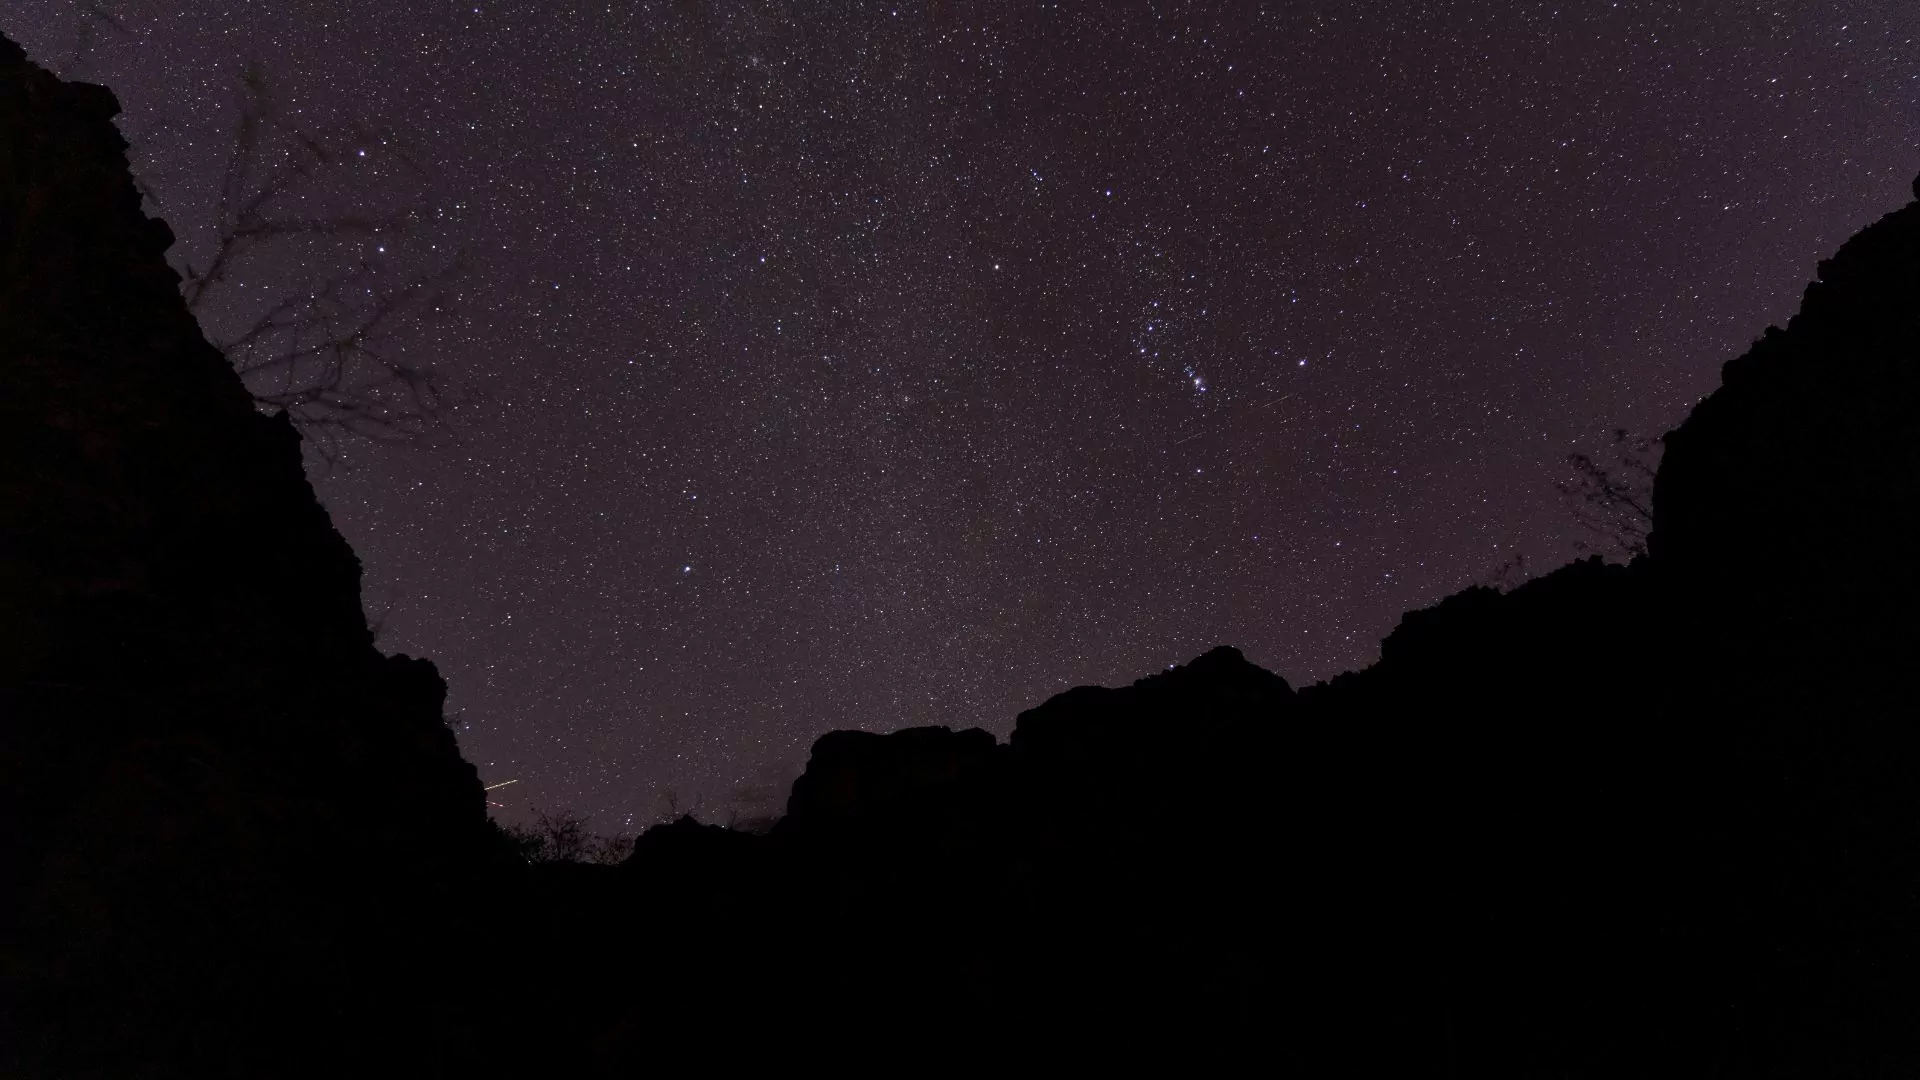 a stary night sky stretches above the canyon rim